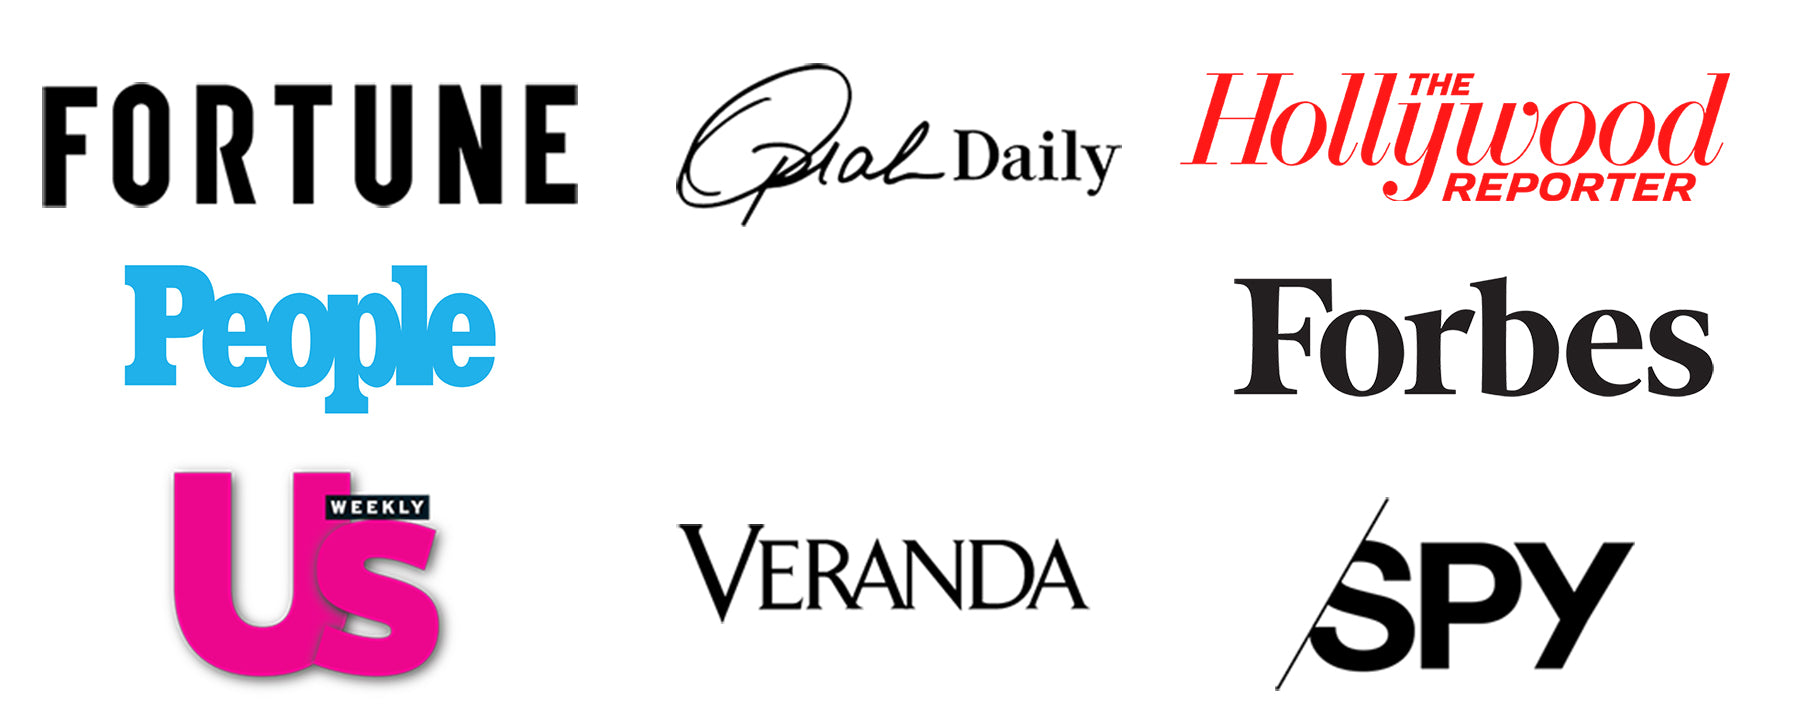 Alexander Daas Press featured in Fortune, Oprah Daily, The Hollywood Reporter, People, Forbes, Us Weekly, Veranda, and Spy